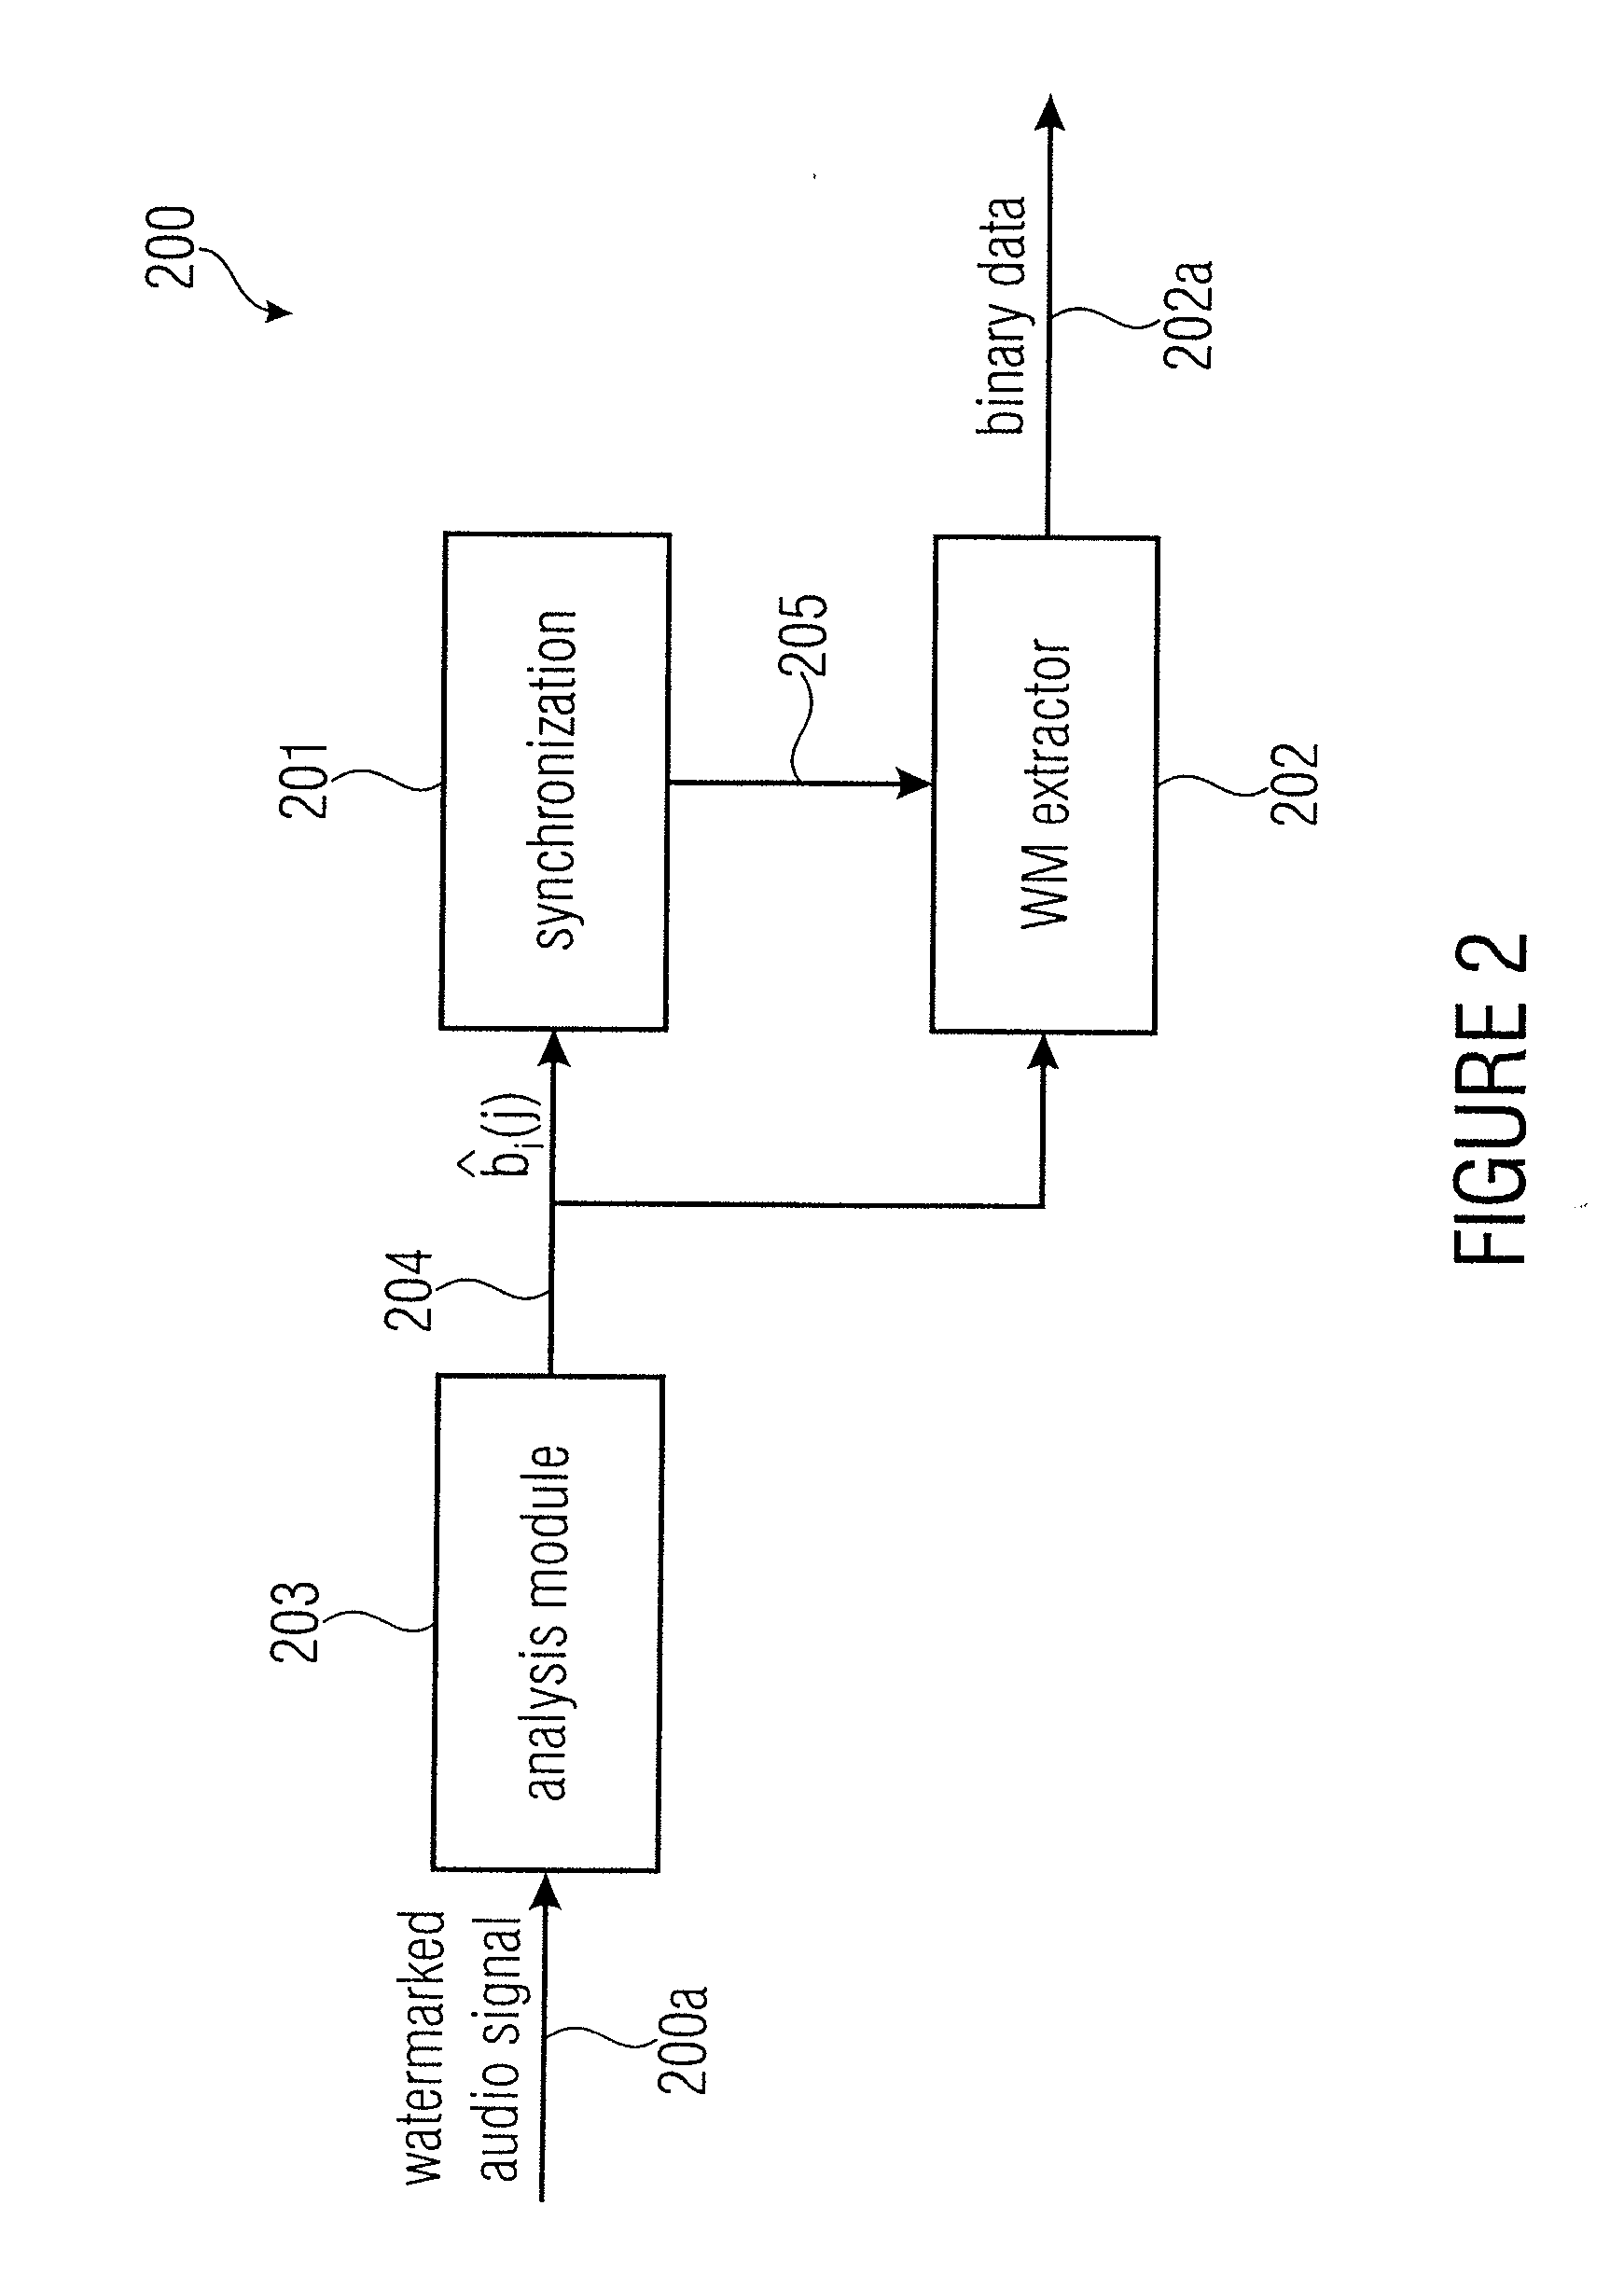 Watermark generator, watermark decoder, method for providing a watermark signal in dependence on binary message data, method for providing binary message data in dependence on a watermarked signal and computer program using a two-dimensional bit spreading